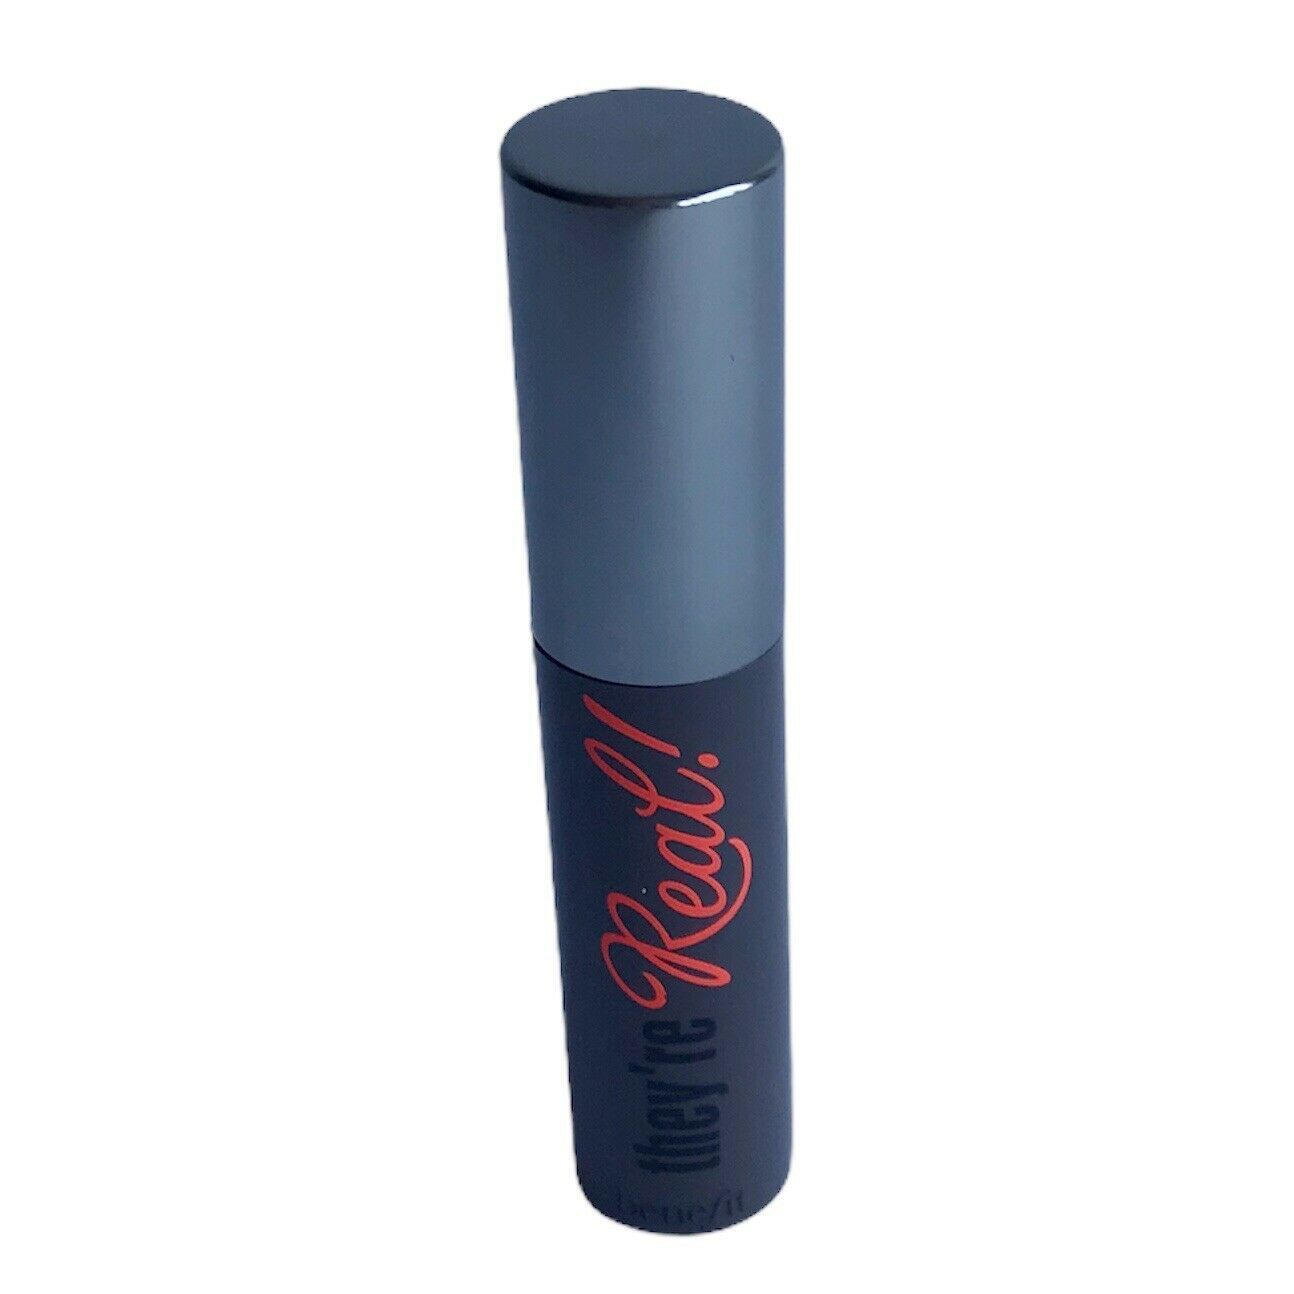 Primary image for Benefit They're Real Beyond Mascara Black 3.0g / 0.1oz Mini Travel Size New NWOB